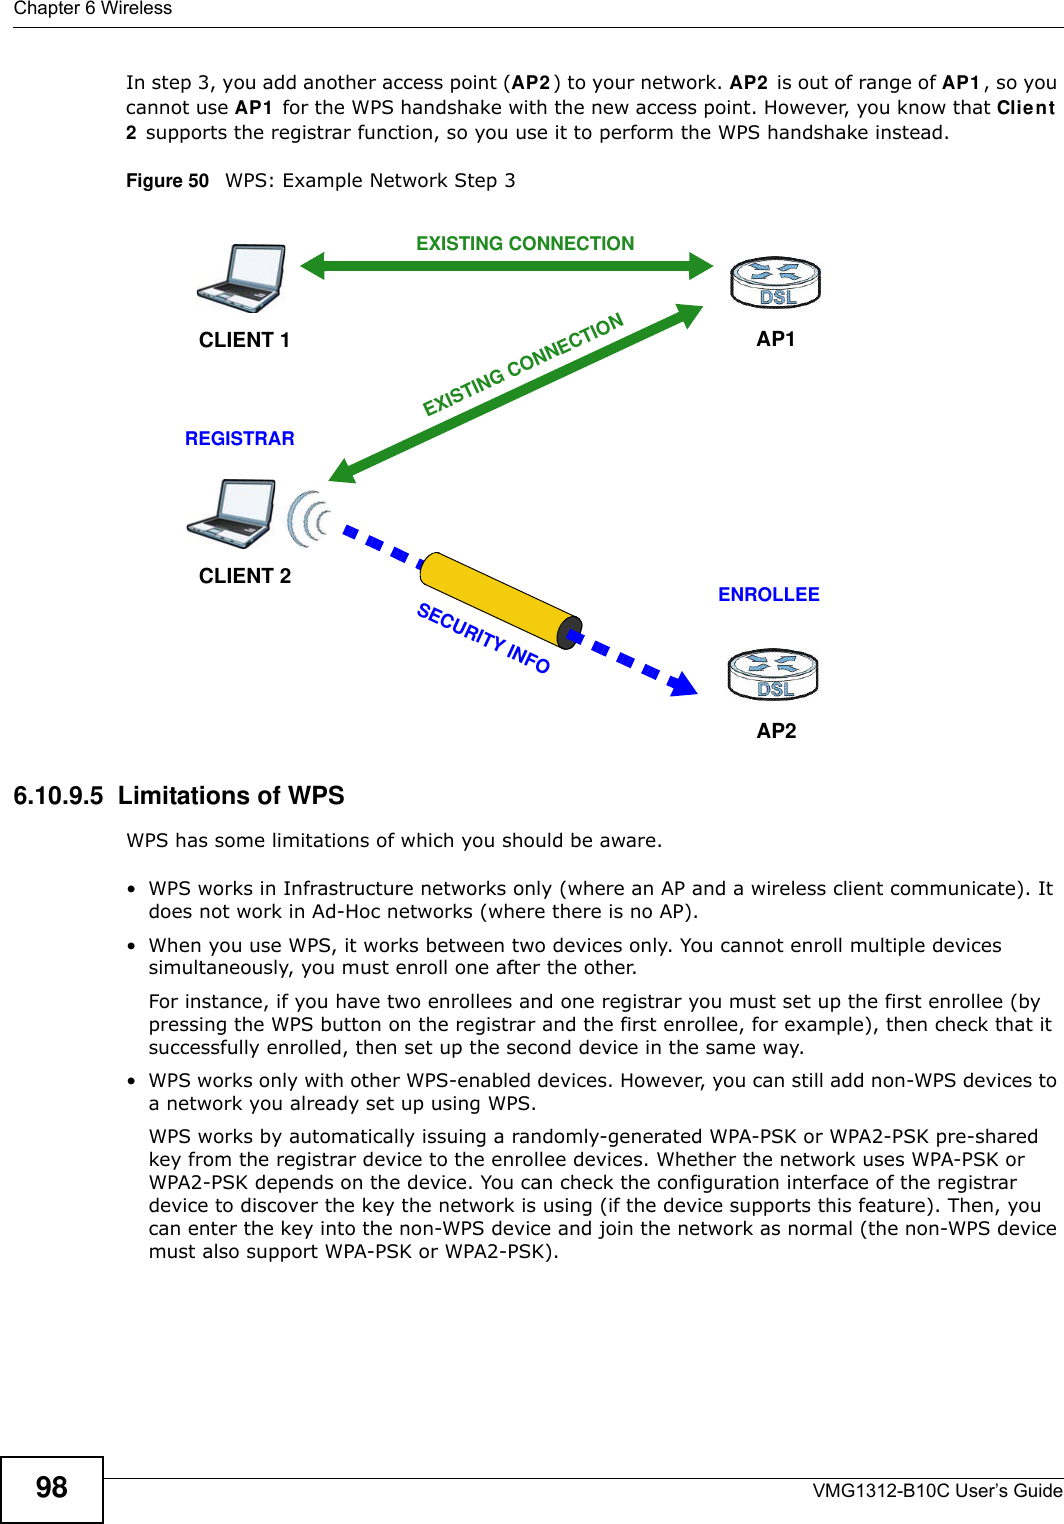 Chapter 6 WirelessVMG1312-B10C User’s Guide98In step 3, you add another access point (AP2 ) to your network. AP2  is out of range of AP1 , so you cannot use AP1  for the WPS handshake with the new access point. However, you know that Clie n t  2 supports the registrar function, so you use it to perform the WPS handshake instead.Figure 50   WPS: Example Network Step 36.10.9.5  Limitations of WPSWPS has some limitations of which you should be aware. • WPS works in Infrastructure networks only (where an AP and a wireless client communicate). It does not work in Ad-Hoc networks (where there is no AP).• When you use WPS, it works between two devices only. You cannot enroll multiple devices simultaneously, you must enroll one after the other. For instance, if you have two enrollees and one registrar you must set up the first enrollee (by pressing the WPS button on the registrar and the first enrollee, for example), then check that it successfully enrolled, then set up the second device in the same way.• WPS works only with other WPS-enabled devices. However, you can still add non-WPS devices to a network you already set up using WPS. WPS works by automatically issuing a randomly-generated WPA-PSK or WPA2-PSK pre-shared key from the registrar device to the enrollee devices. Whether the network uses WPA-PSK or WPA2-PSK depends on the device. You can check the configuration interface of the registrar device to discover the key the network is using (if the device supports this feature). Then, you can enter the key into the non-WPS device and join the network as normal (the non-WPS device must also support WPA-PSK or WPA2-PSK).CLIENT 1 AP1REGISTRARCLIENT 2EXISTING CONNECTIONSECURITY INFOENROLLEEAP2EXISTING CONNECTION